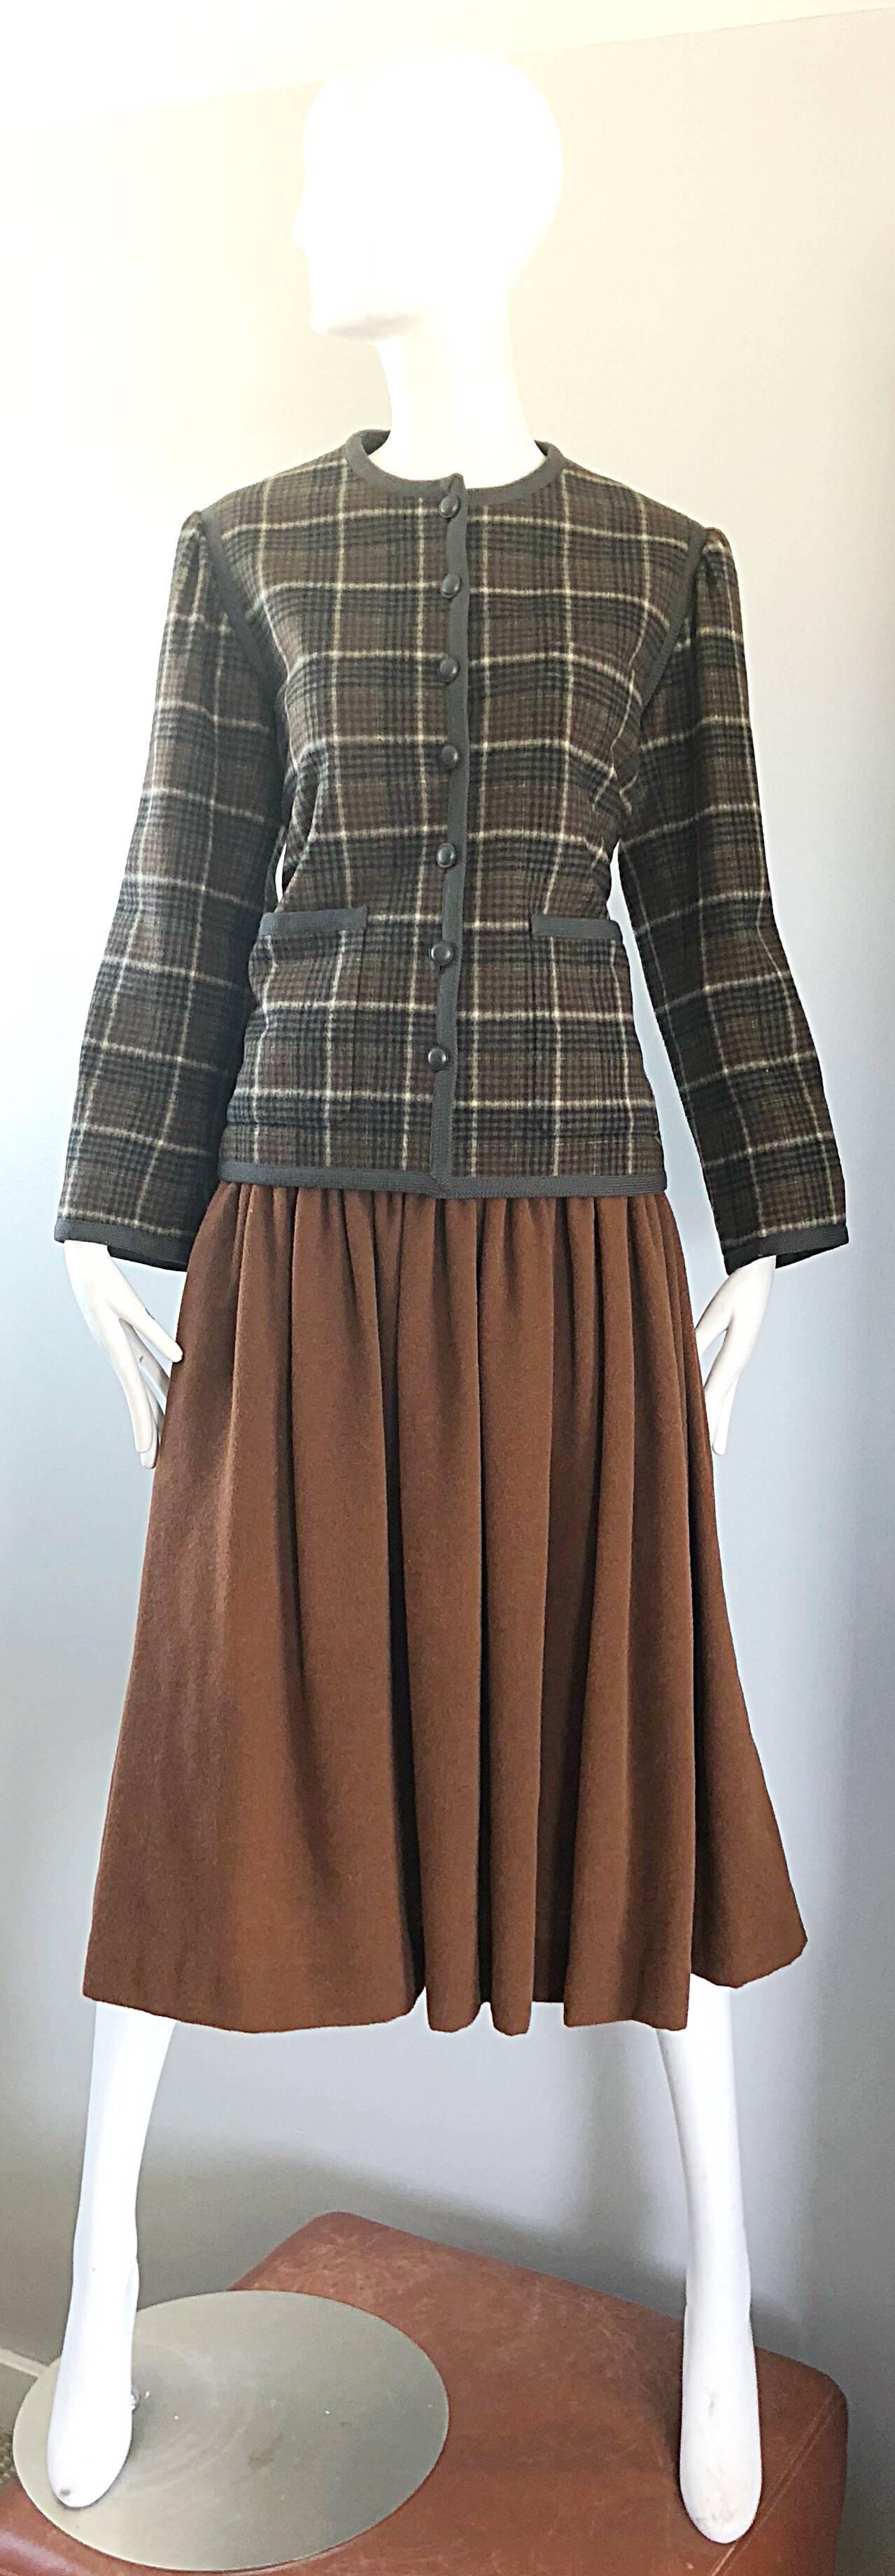 Vintage Yves Saint Laurent Russian Collection 1976 Jacket and Skirt Suit YSL 70s For Sale 9